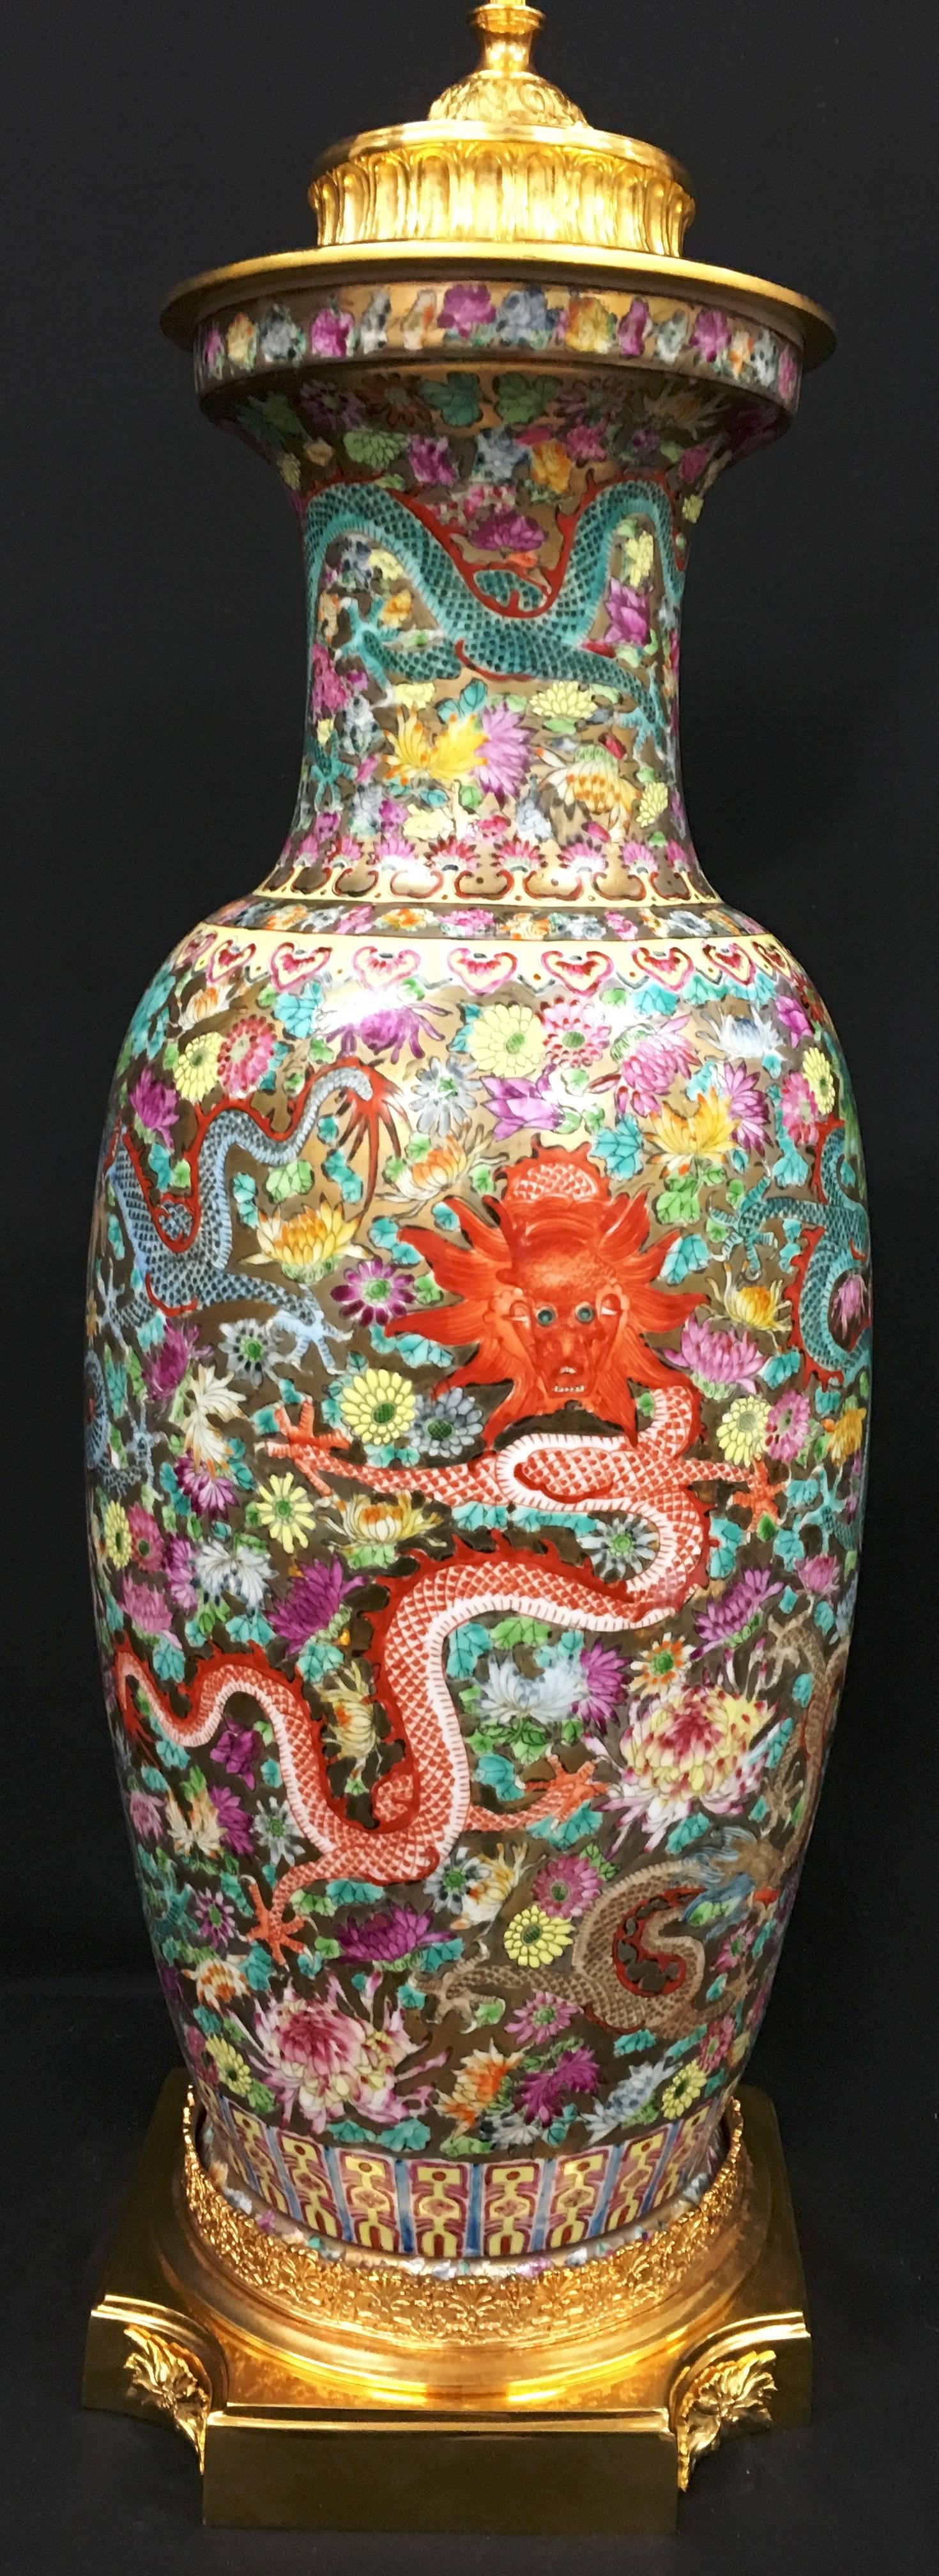 A very impressive 19th century Chinese famille rose vase/lamp. Having fine hand-painted decoration, depicting flowers and foliage with mythical dragons amongst them and gilded ormolu mounts to the top and base.